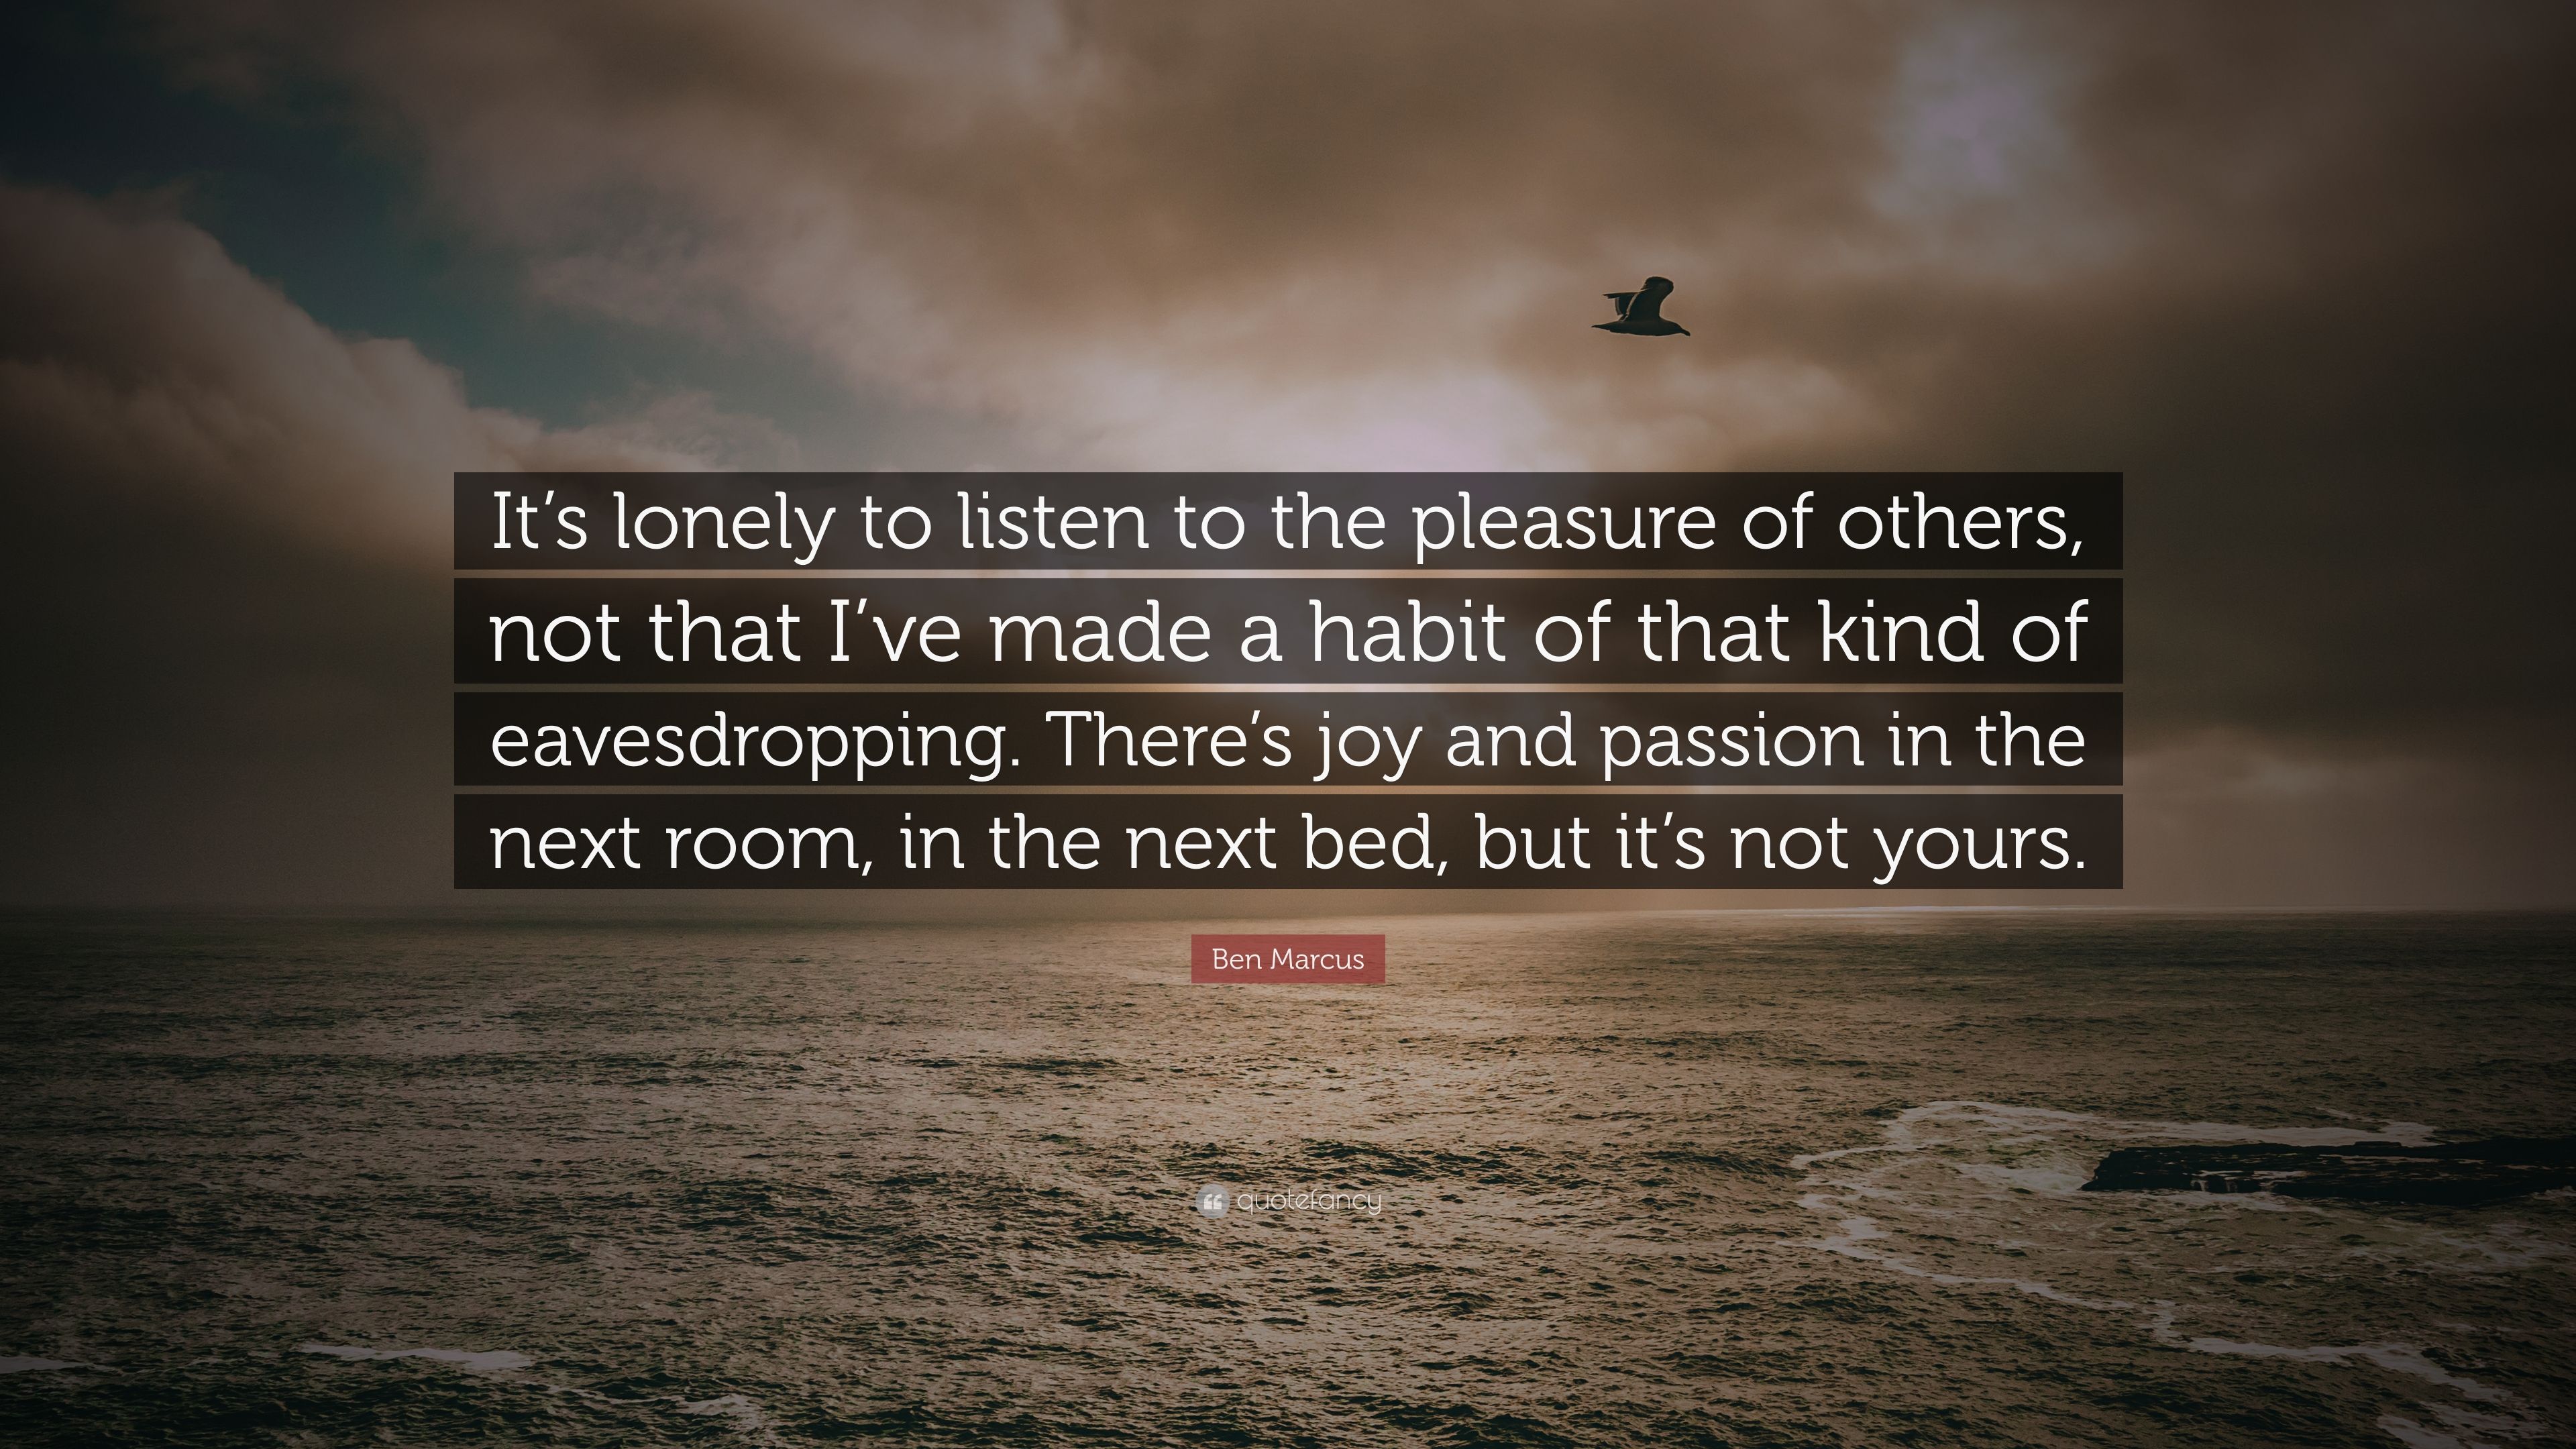 Ben Marcus Quote: “It's lonely to listen to the pleasure of others ...